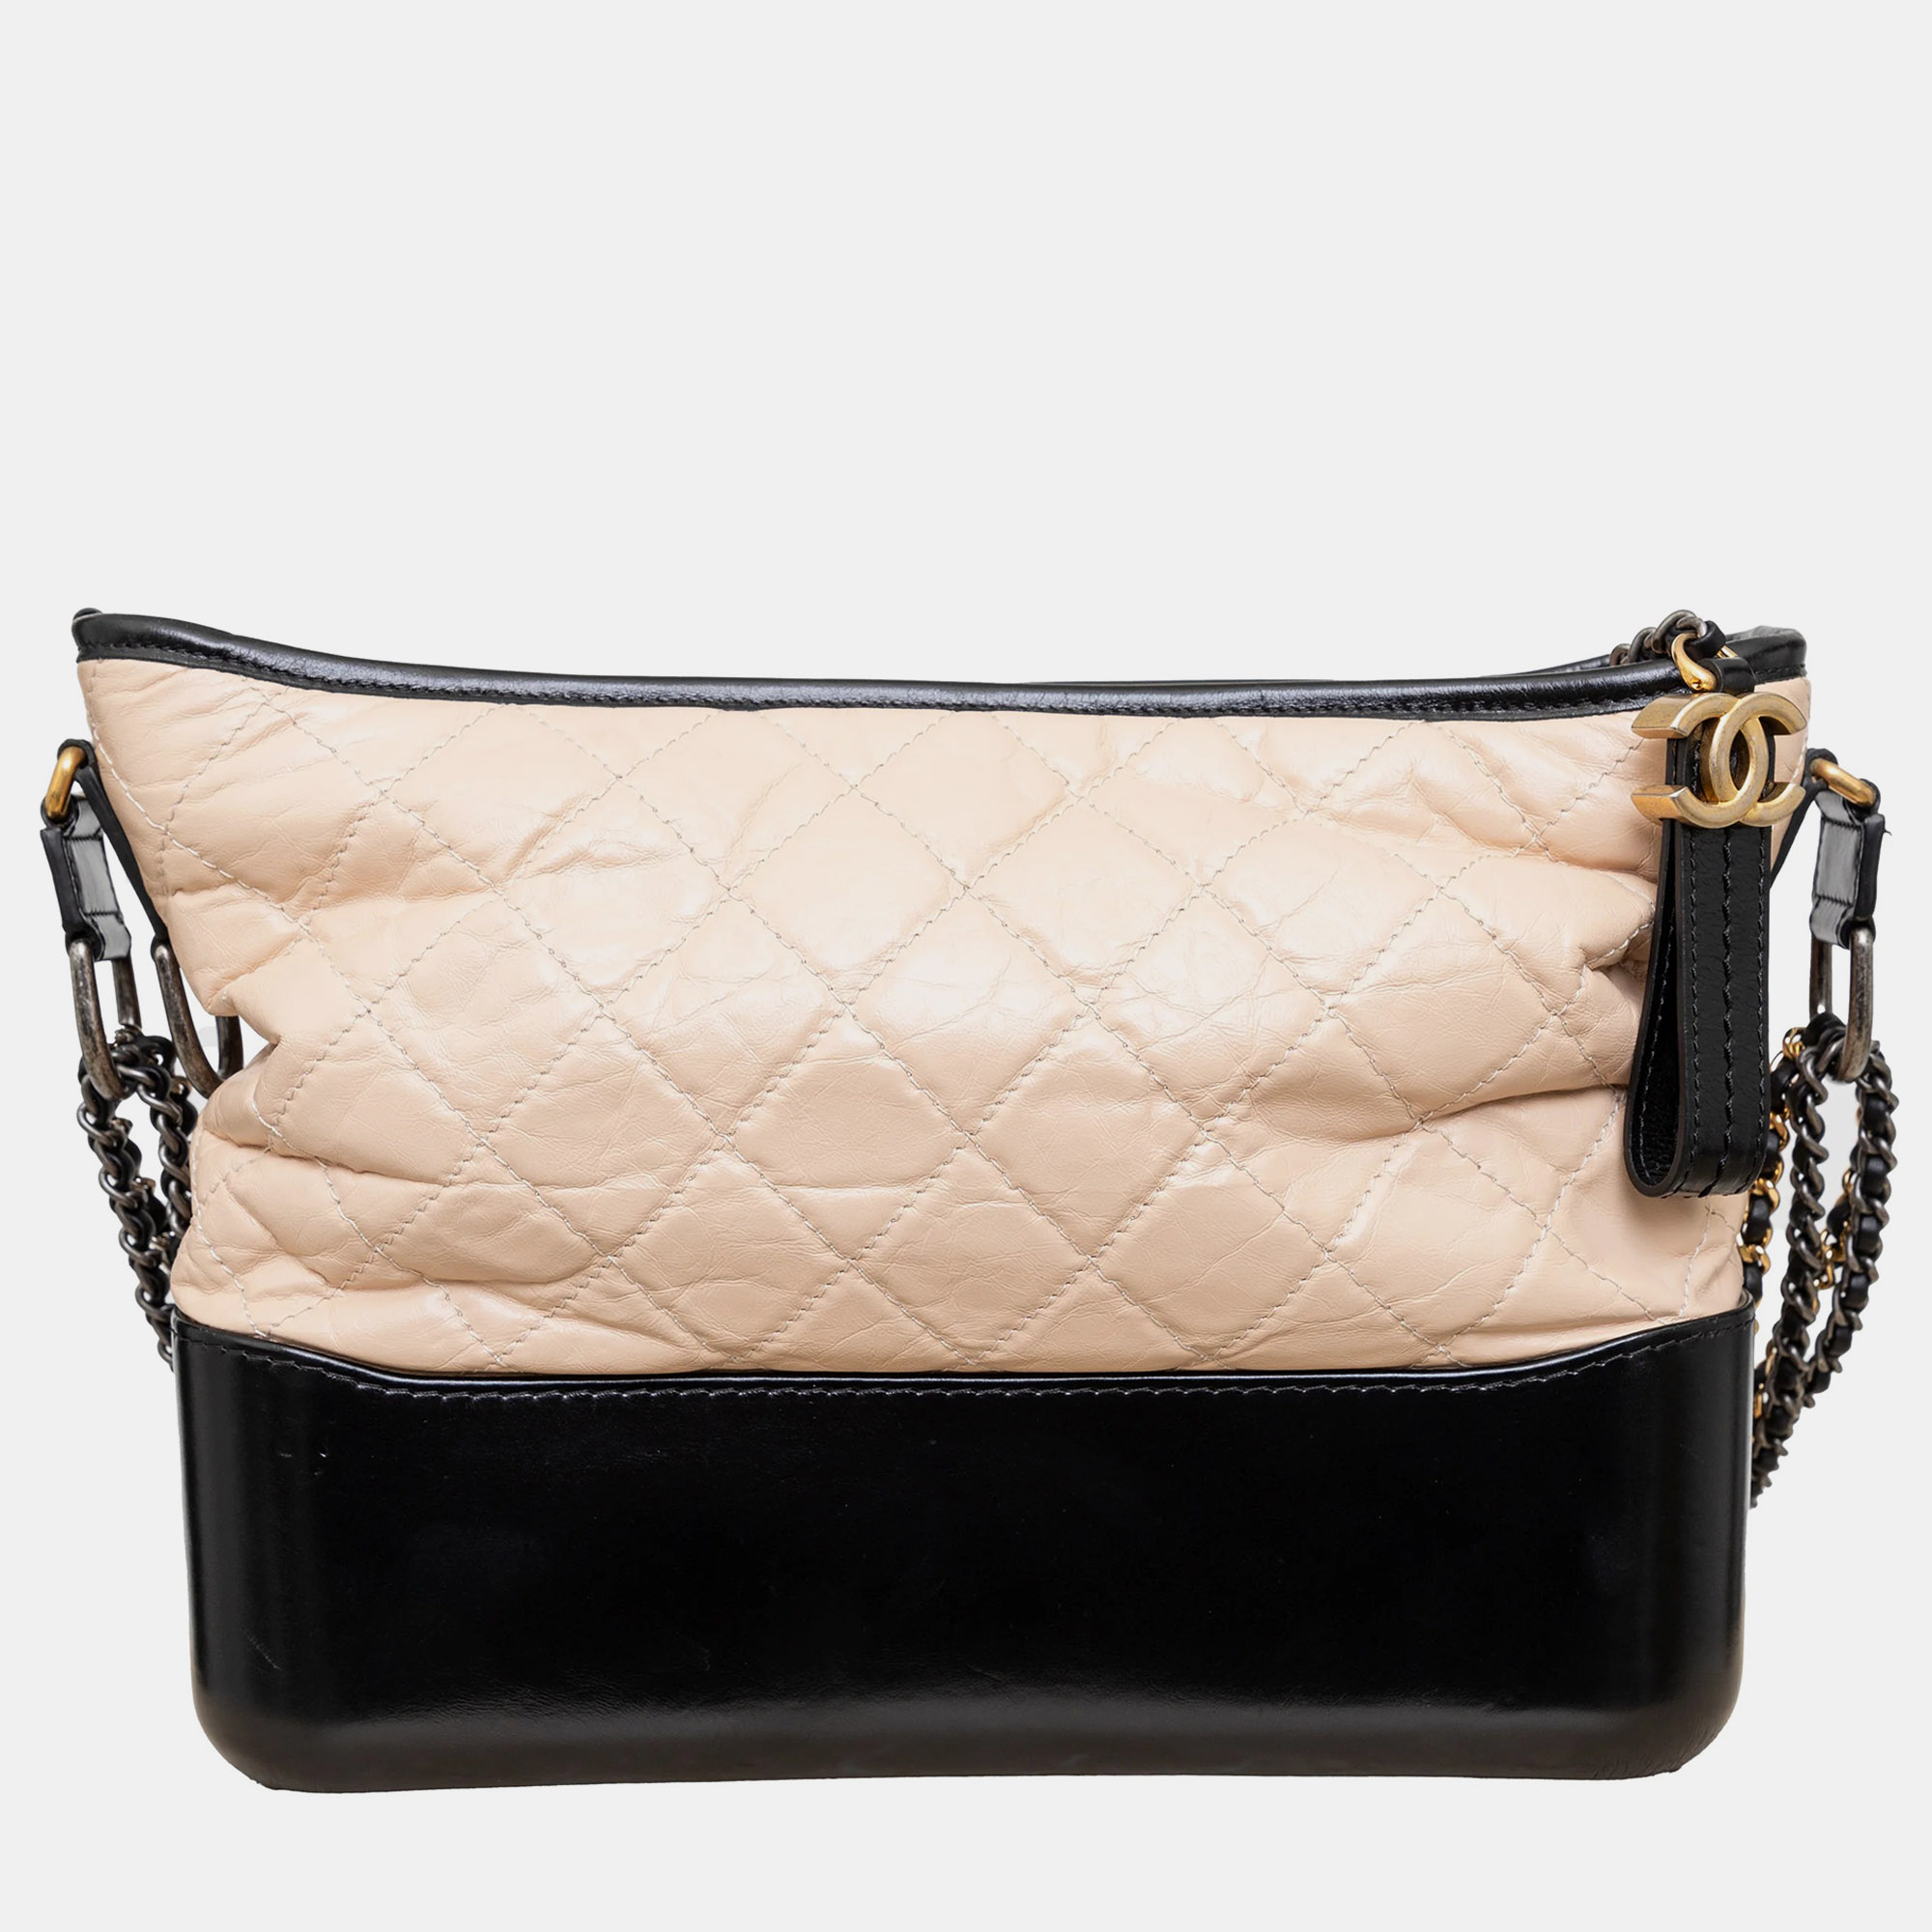 Chanel quilted large gabrielle hobo bag - '10s beige leather